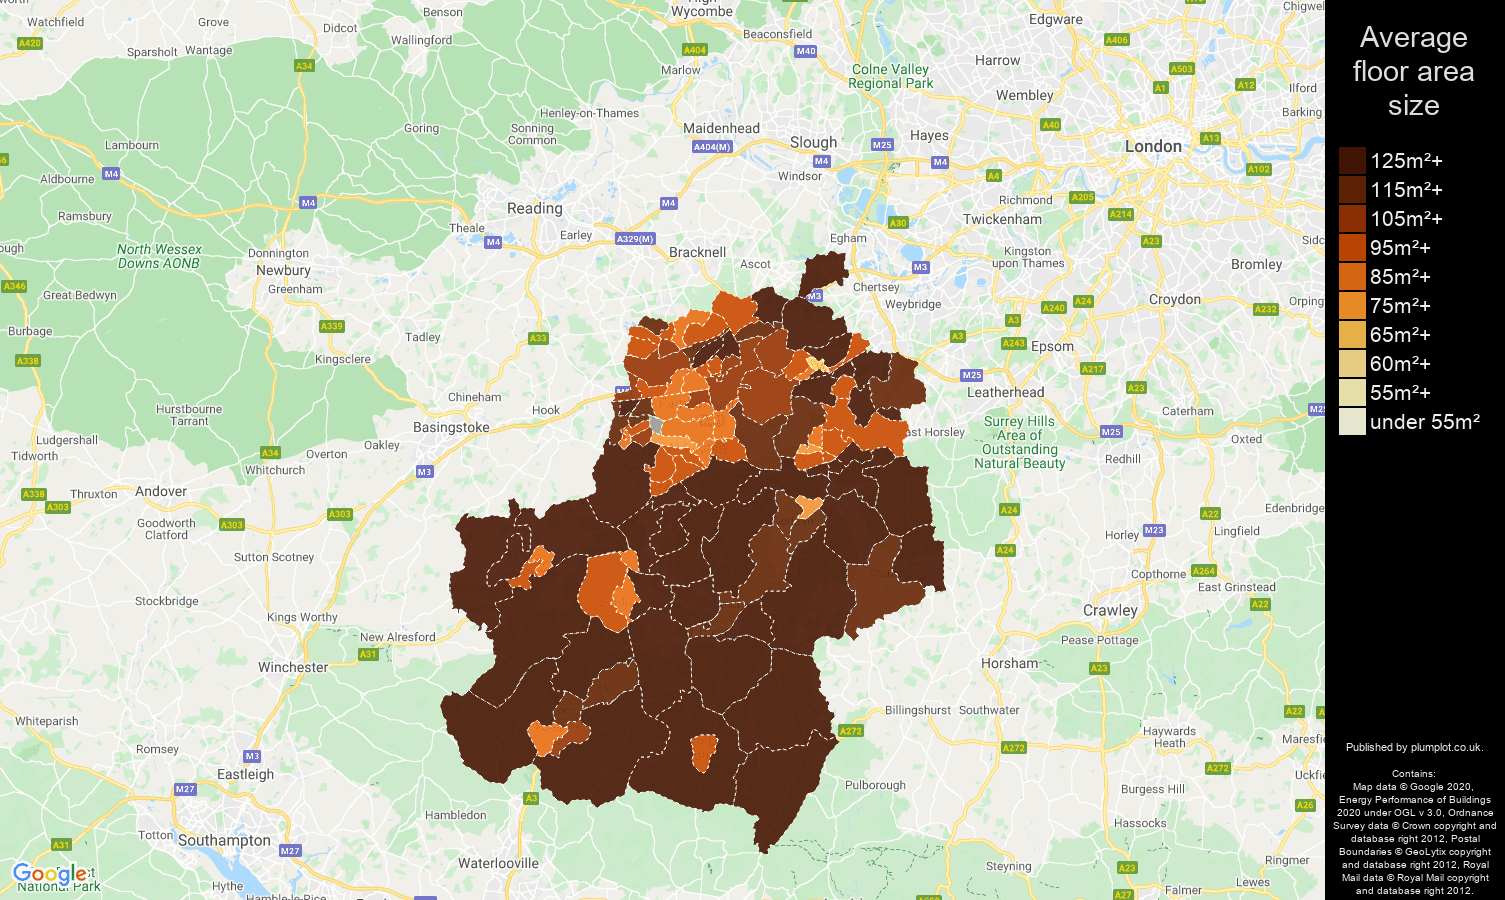 Guildford map of average floor area size of houses